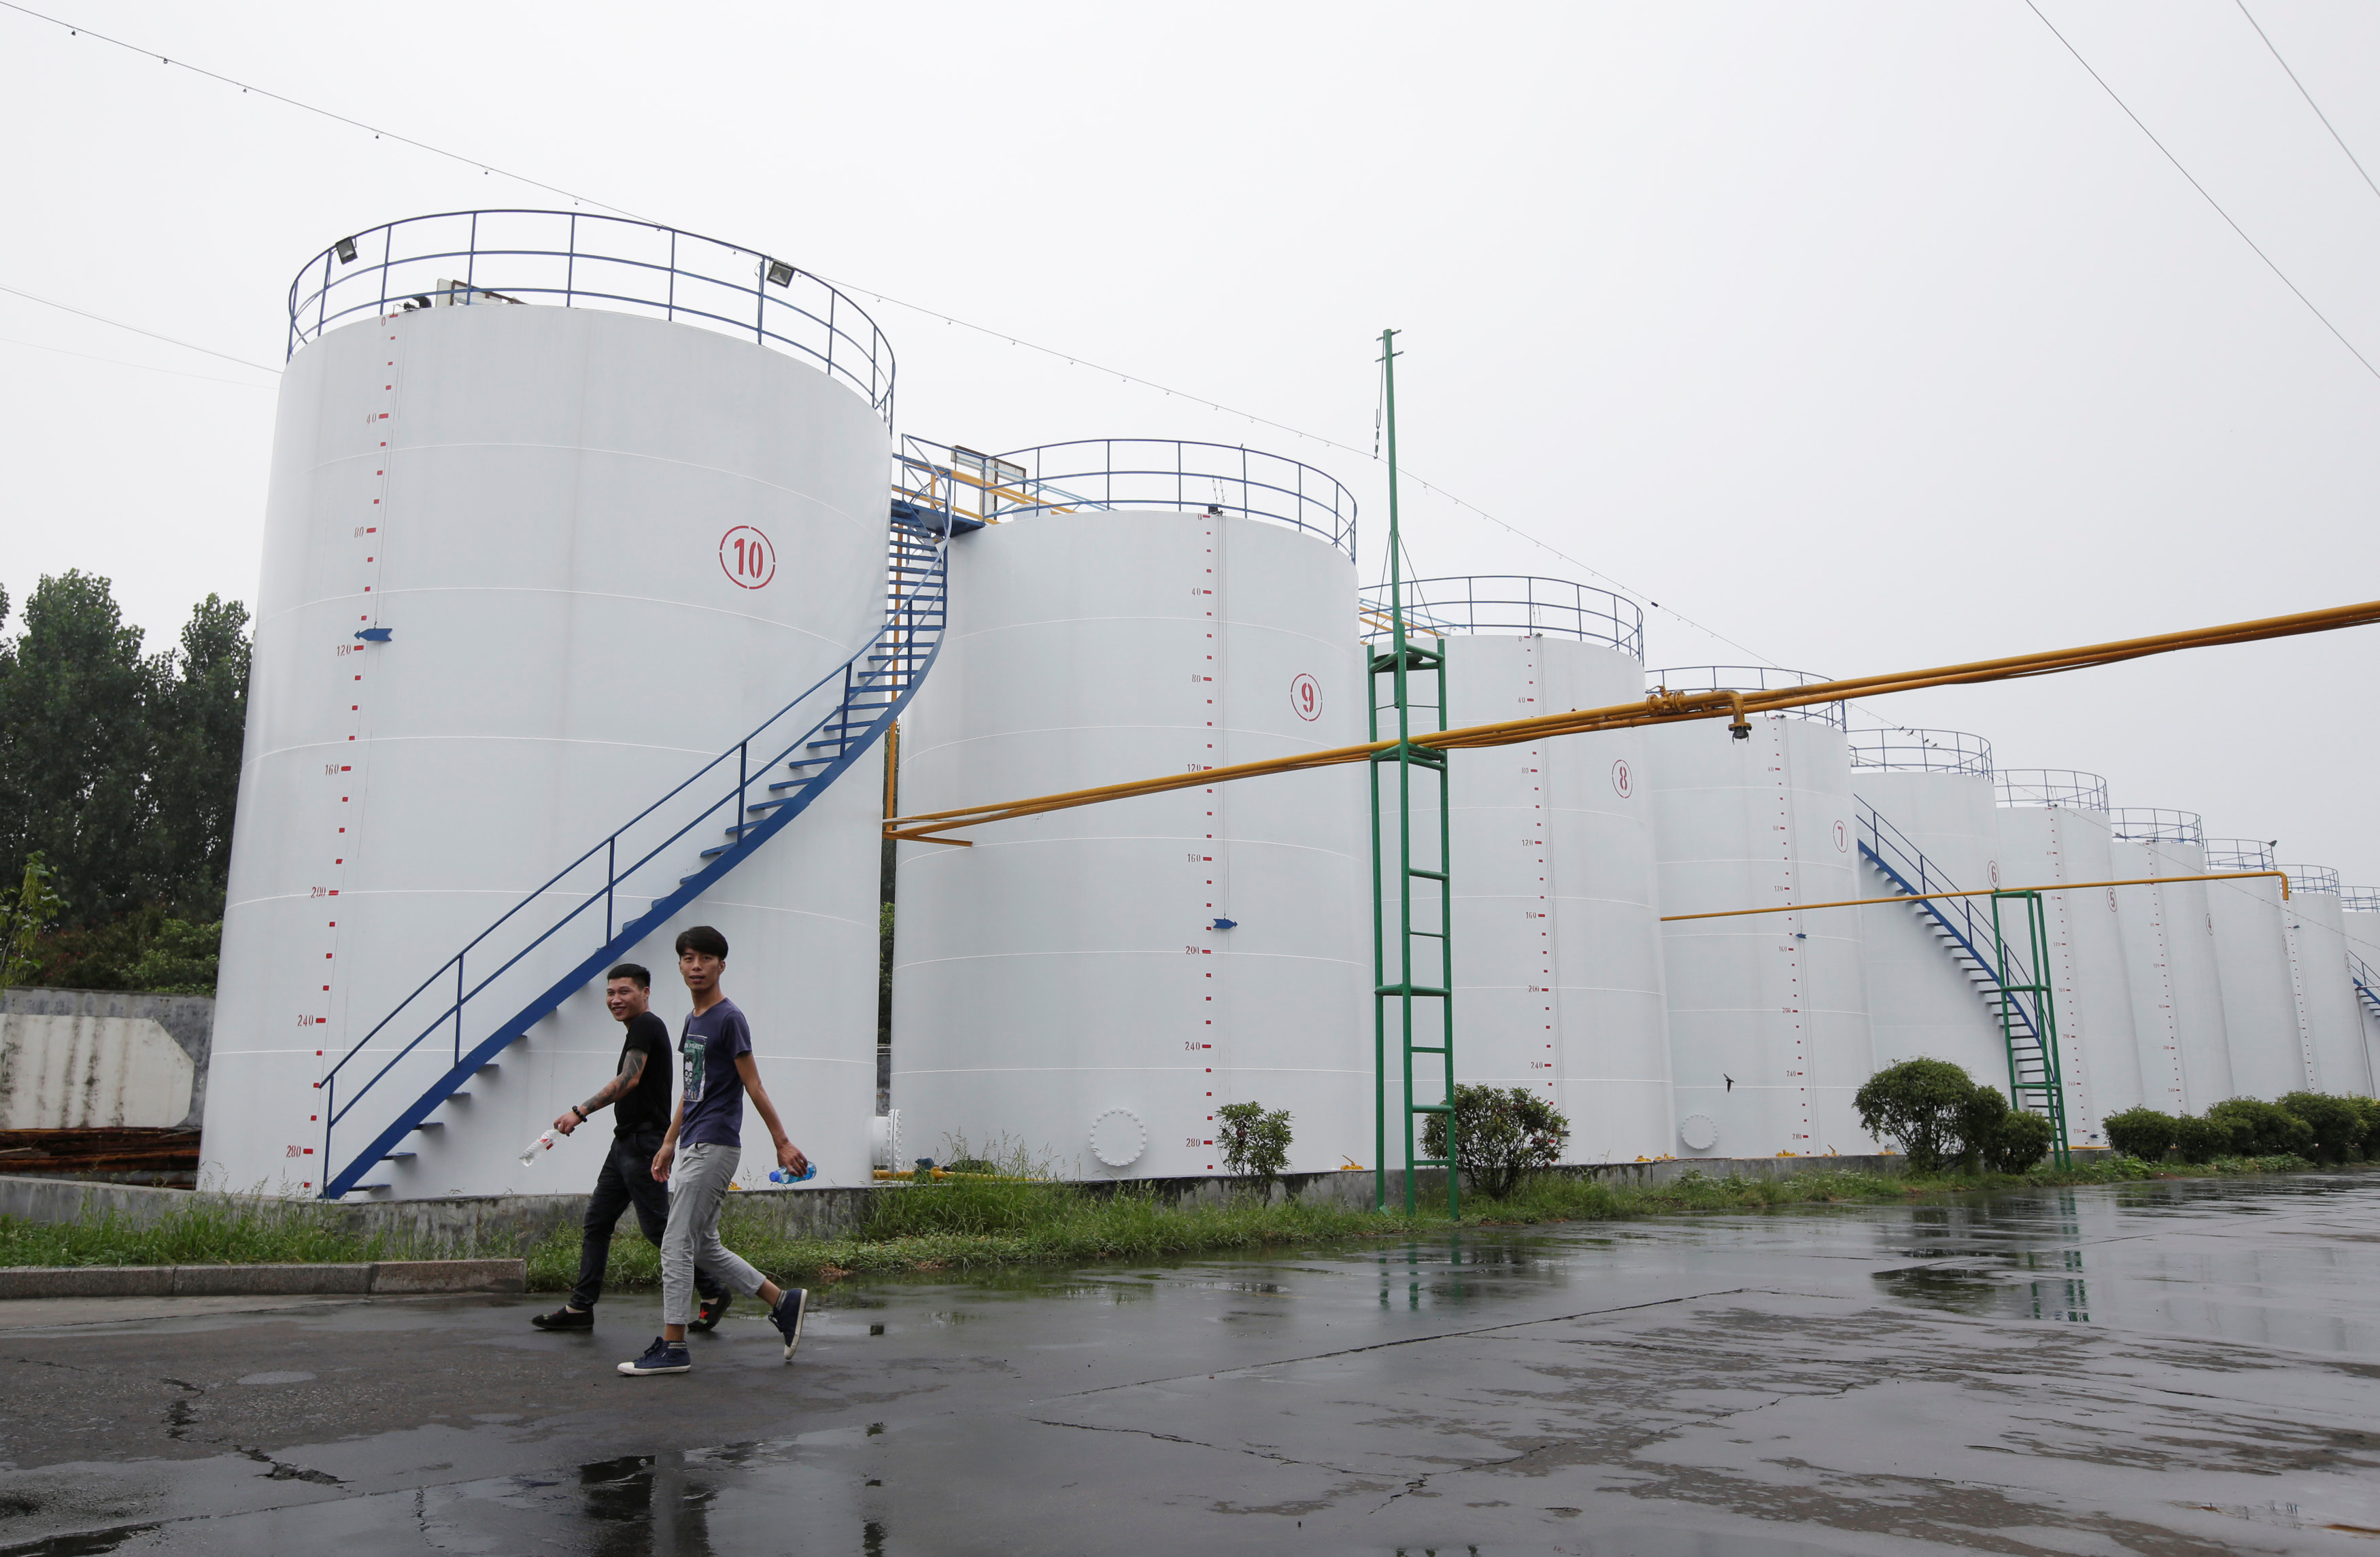 Men walk past oil tanks at the plant of Liangyou Industry and Trade Co., Ltd in Qufu